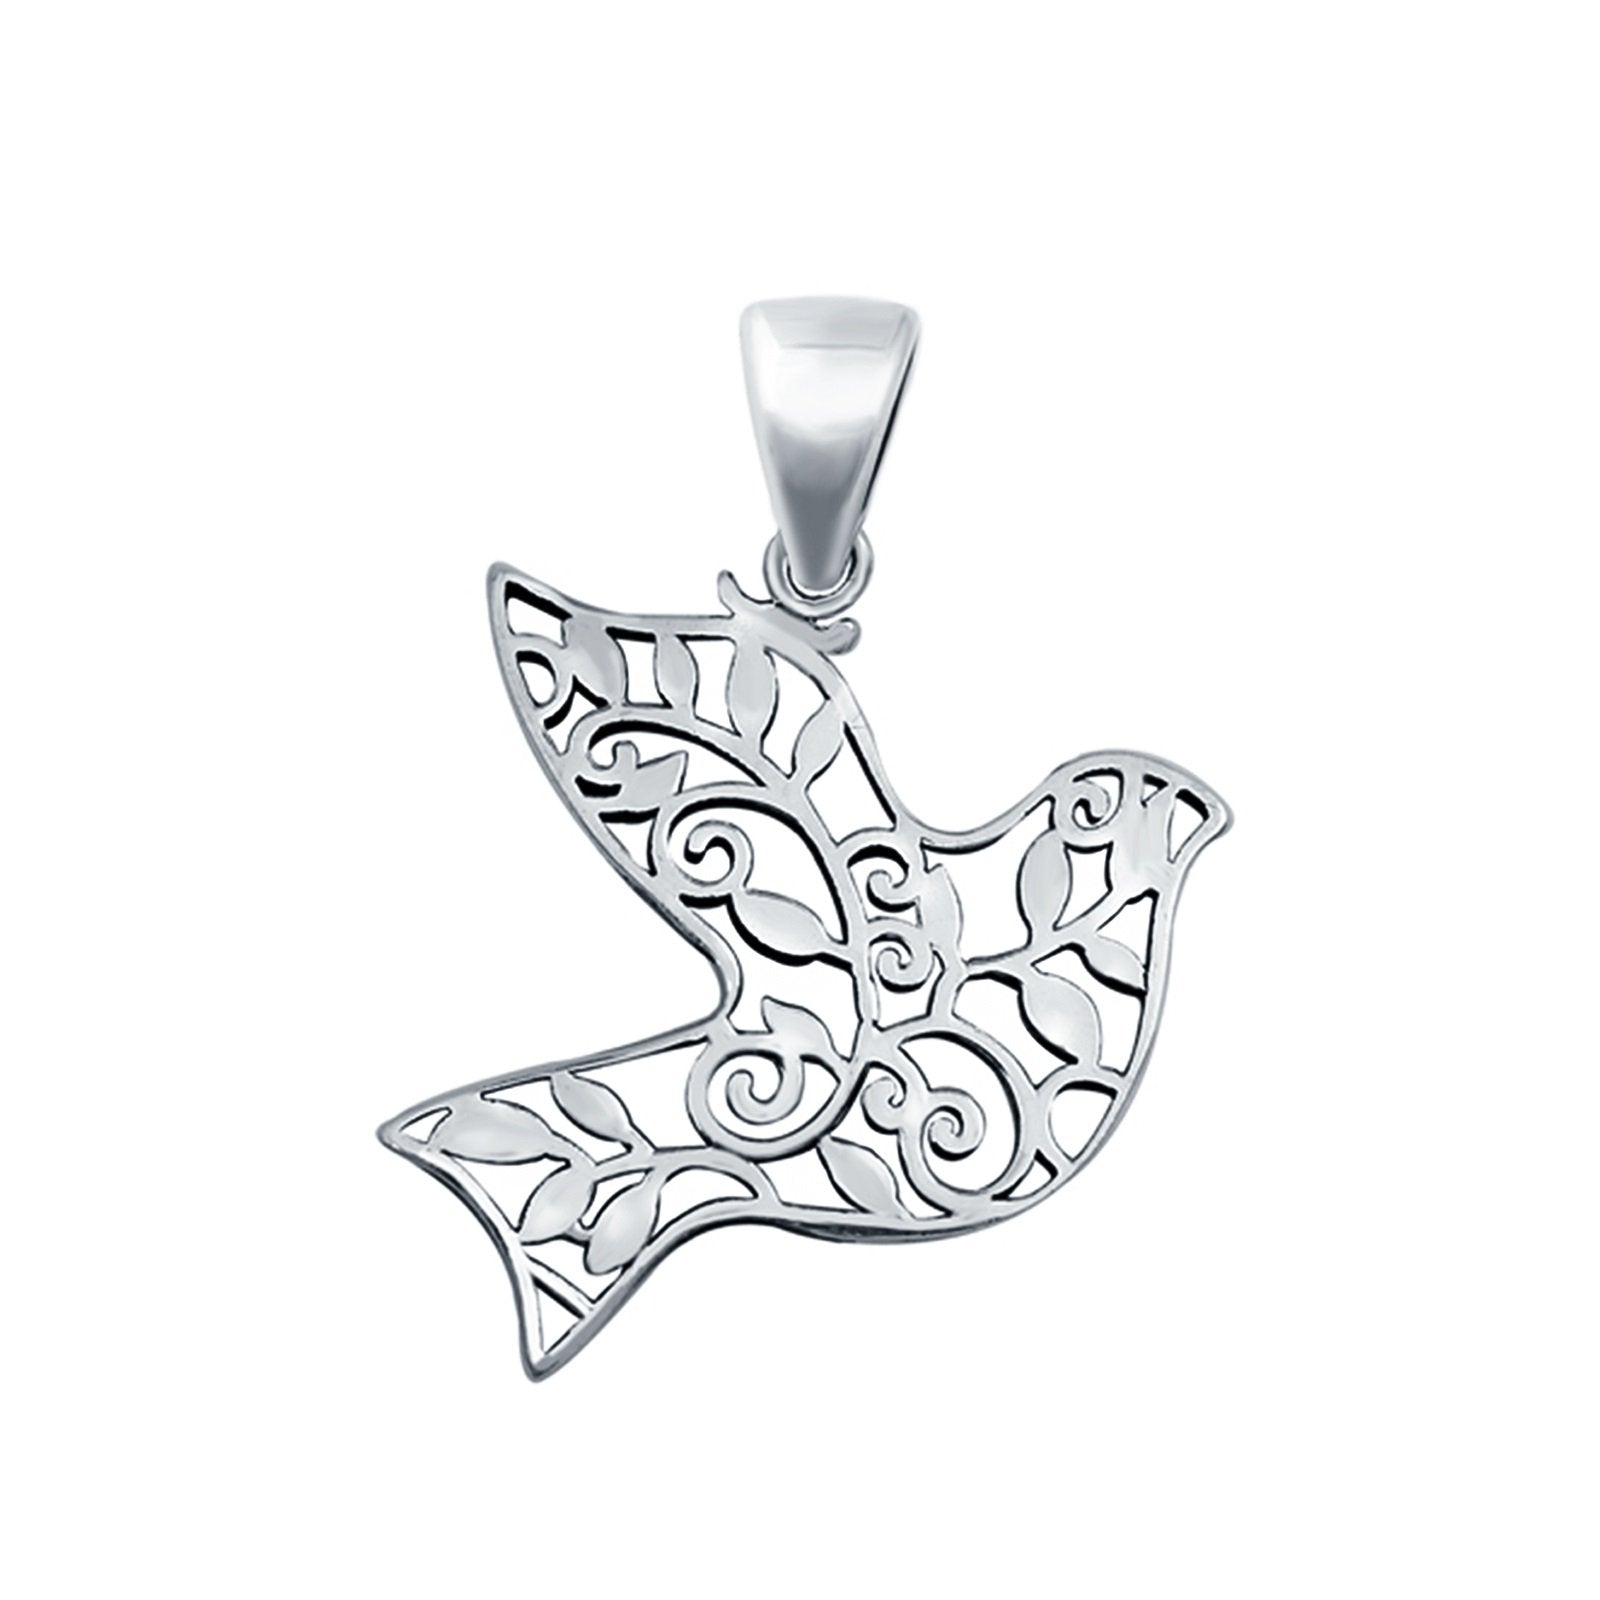 Dove Bird & Flowers Charm Pendant Flowers Round 925 Sterling Silver